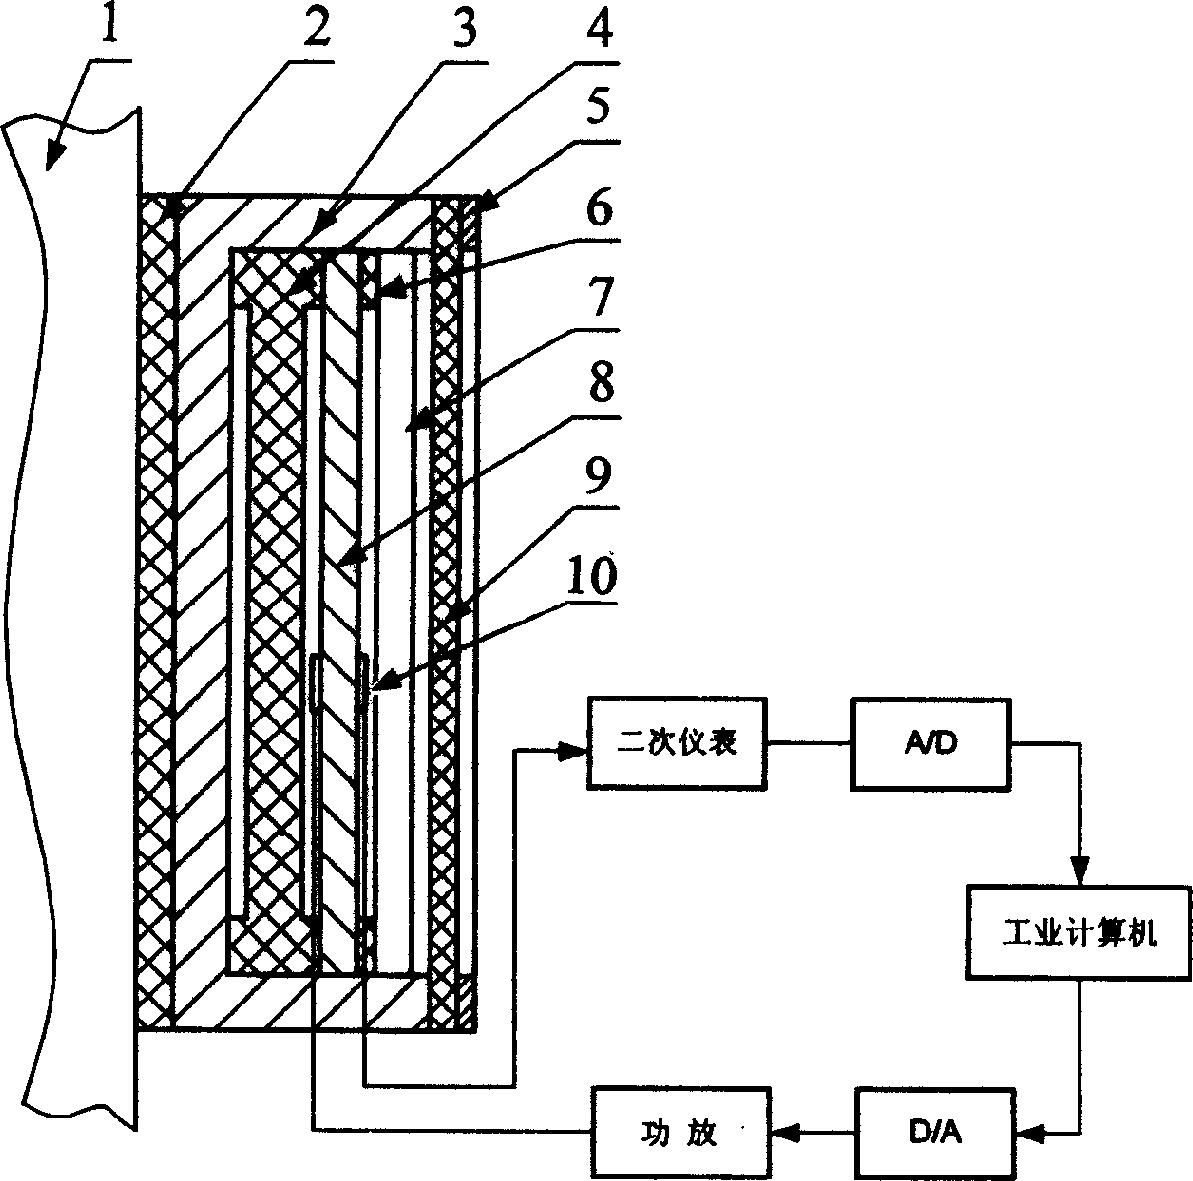 Side sonar array sound barrier device with noise reducing